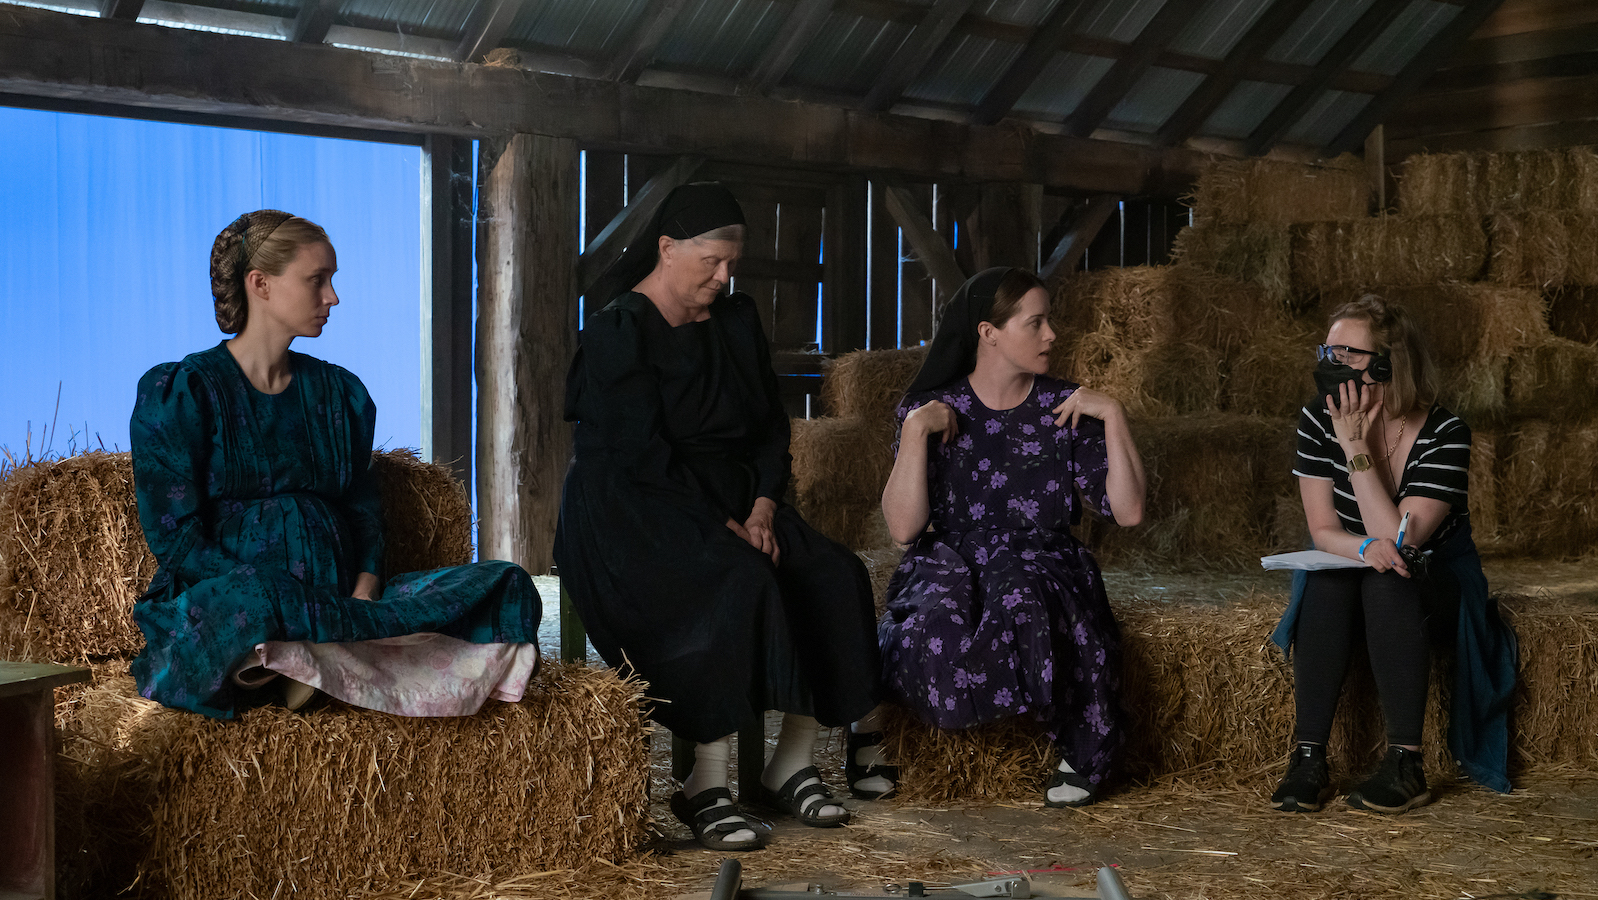 Four women sitting in a hayloft in a barn talk with each other, including the director on the right, listening with a pen and paper and wearing a mask and headphones